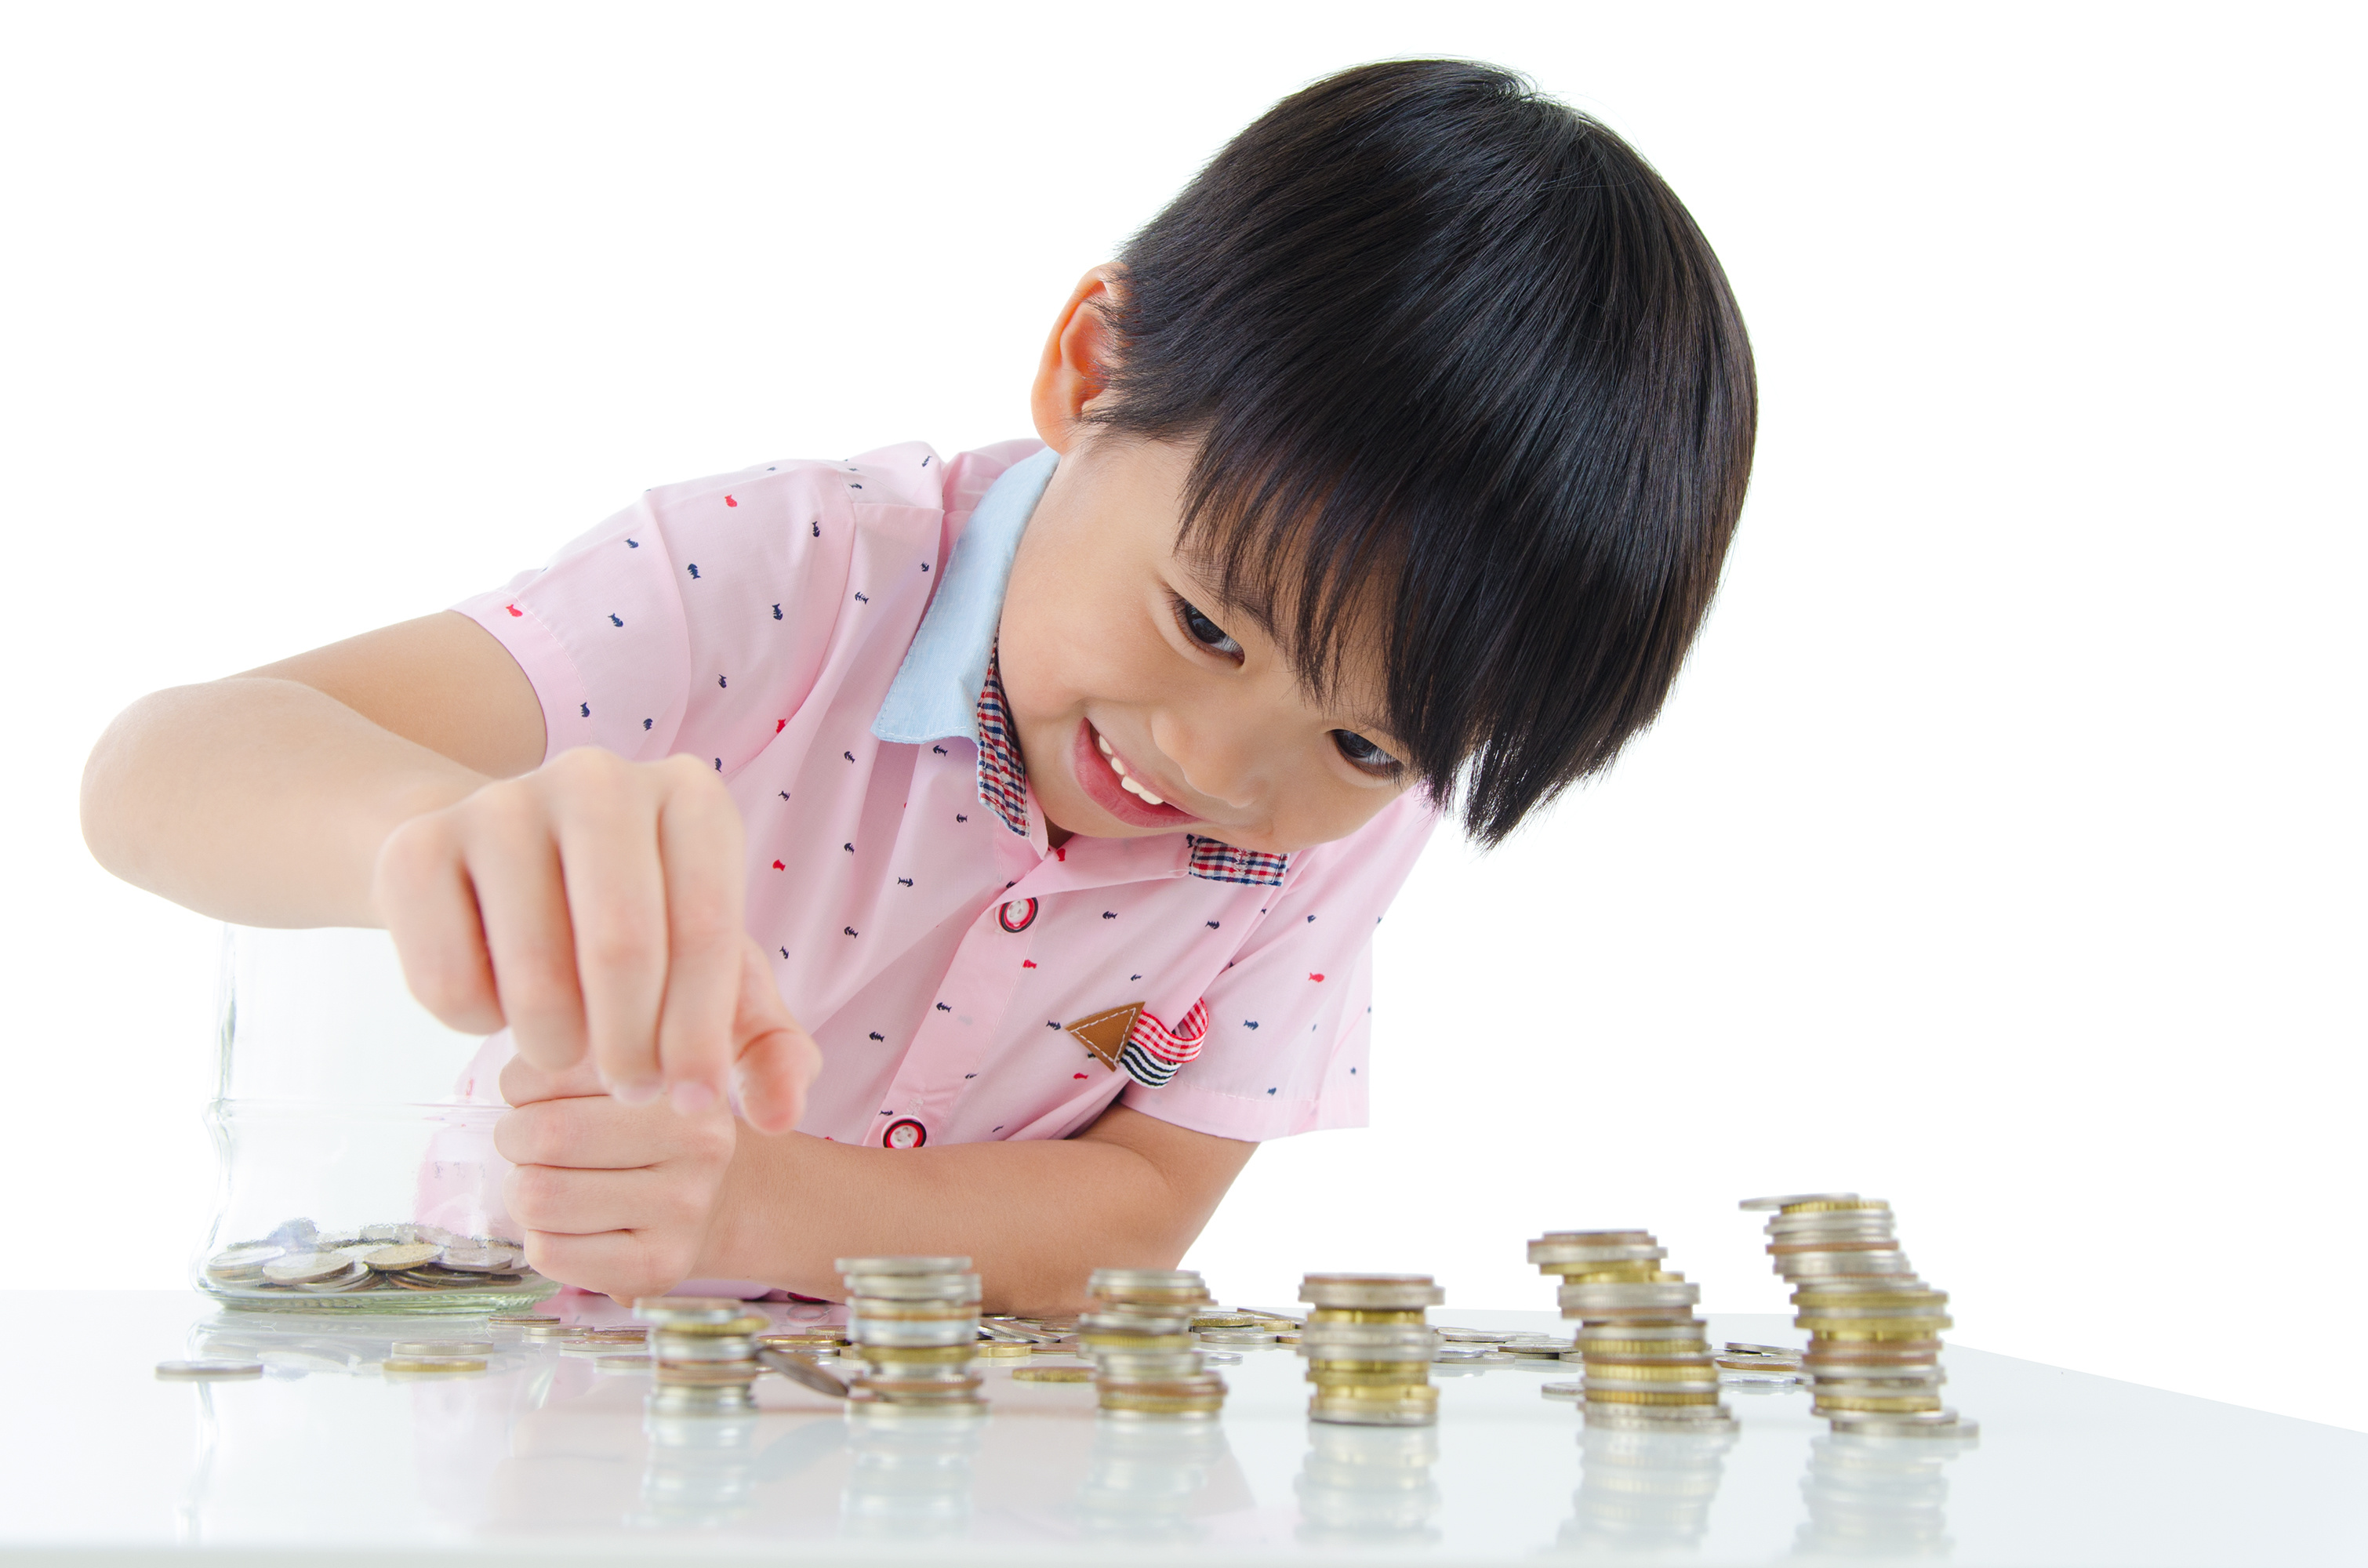 10 Games to Teach Kids About Money